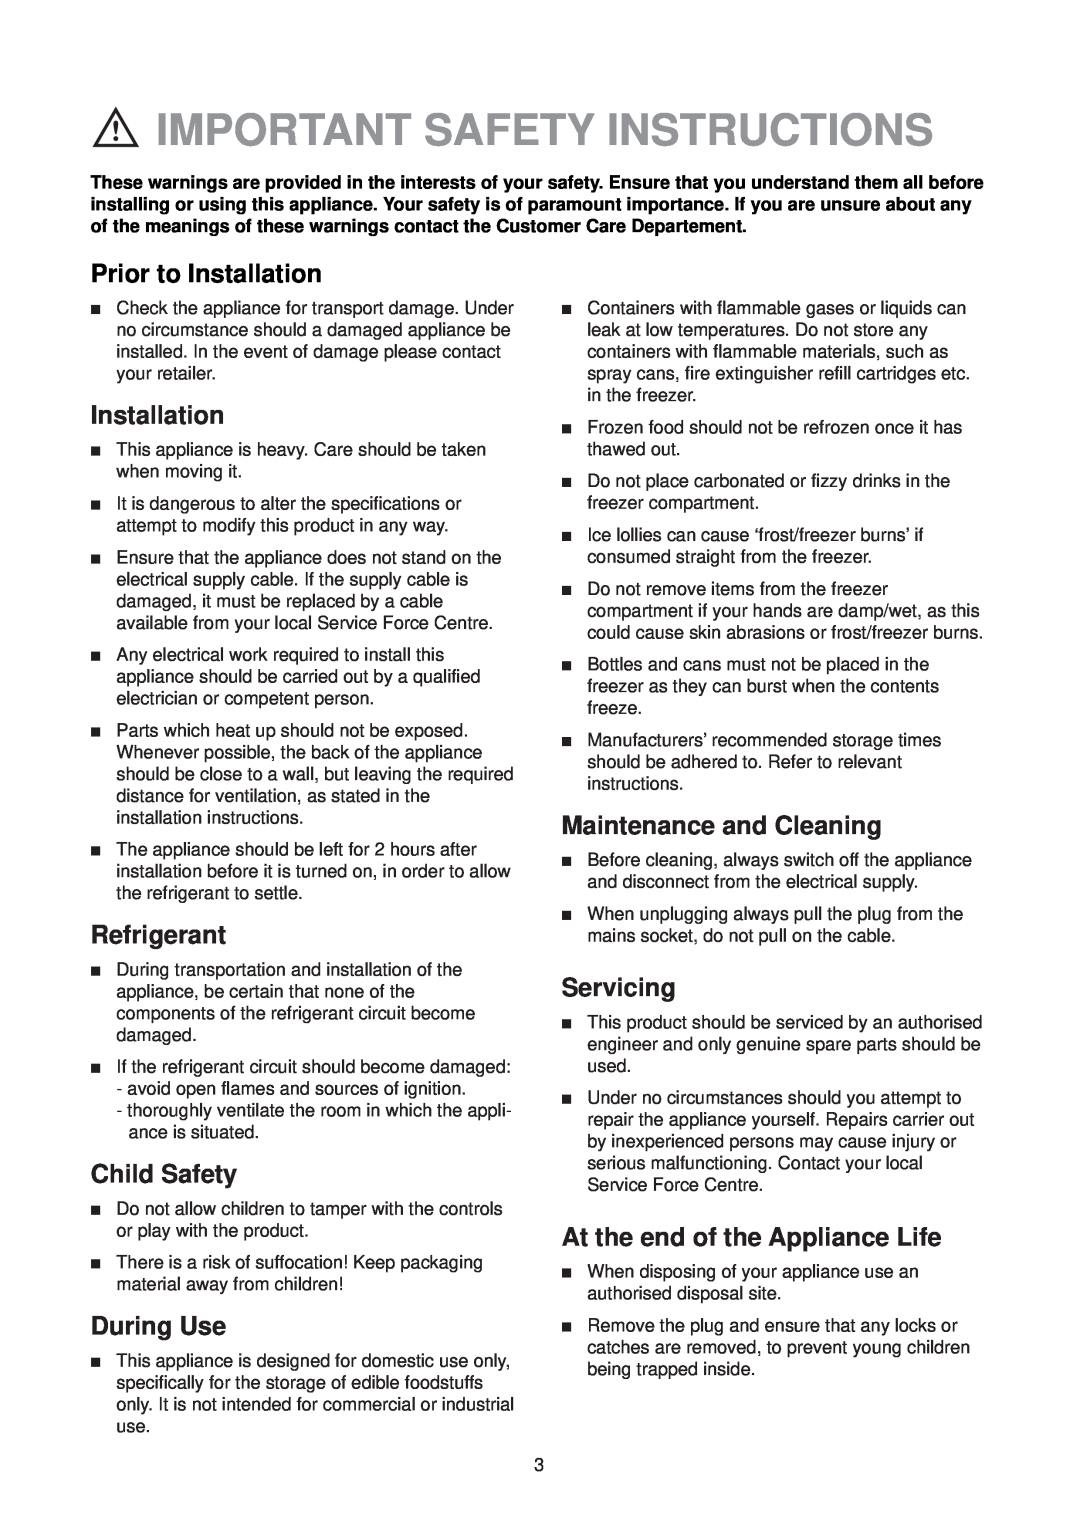 Zanussi FREEZER ZV 47 manual Important Safety Instructions, Prior to Installation, Refrigerant, Child Safety, During Use 